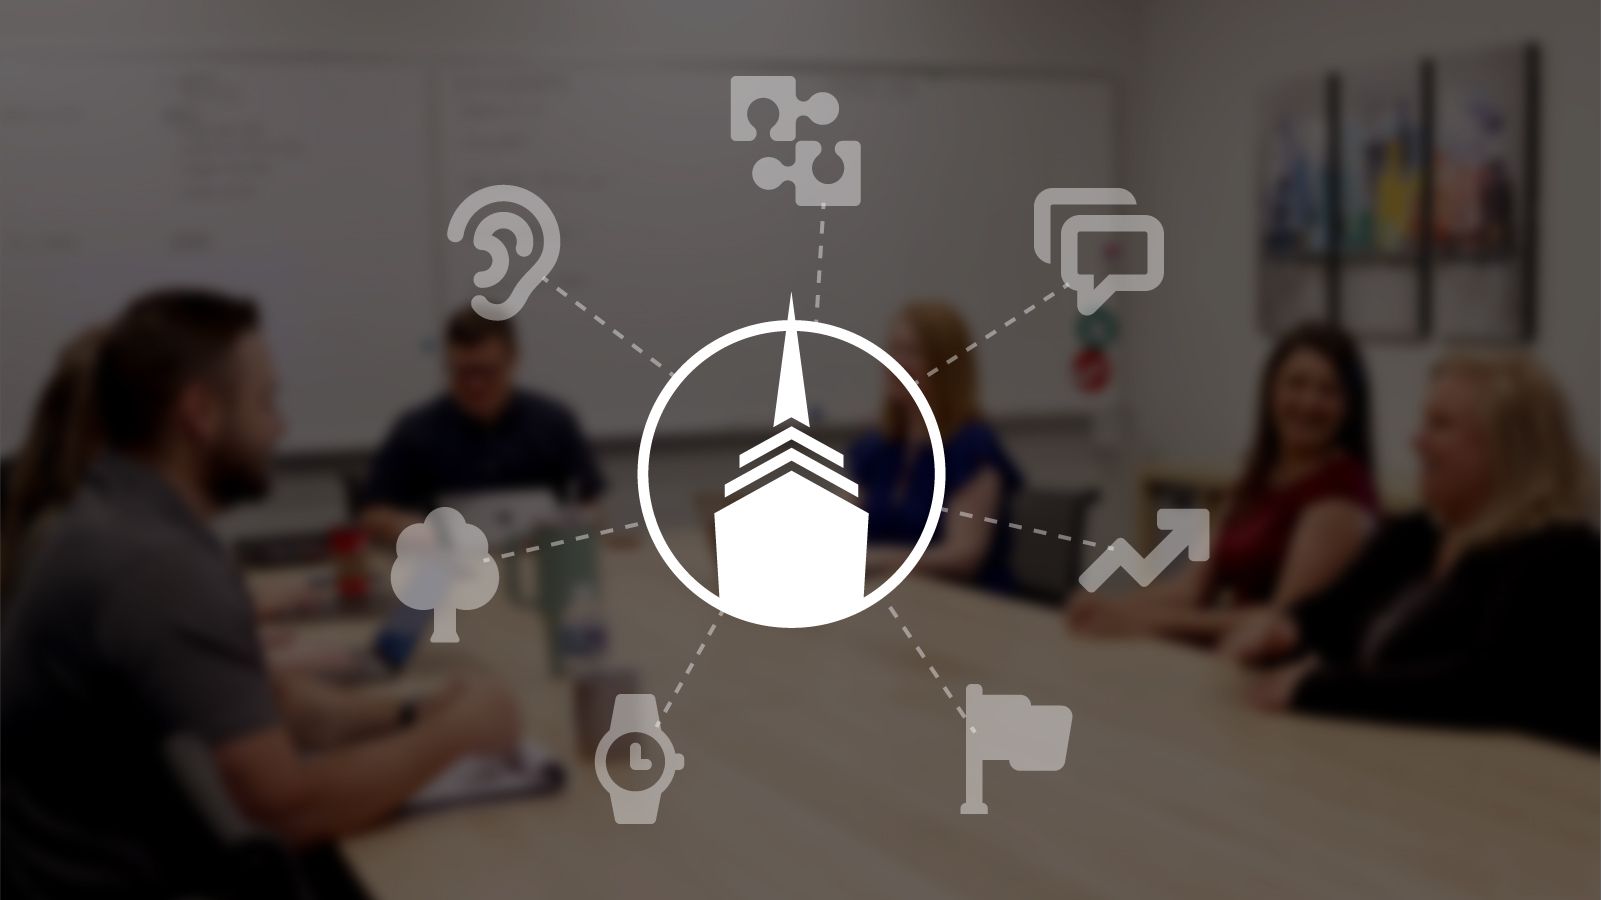 Spire's core values icons overlapping a blurred image of the Spire team having a meeting.